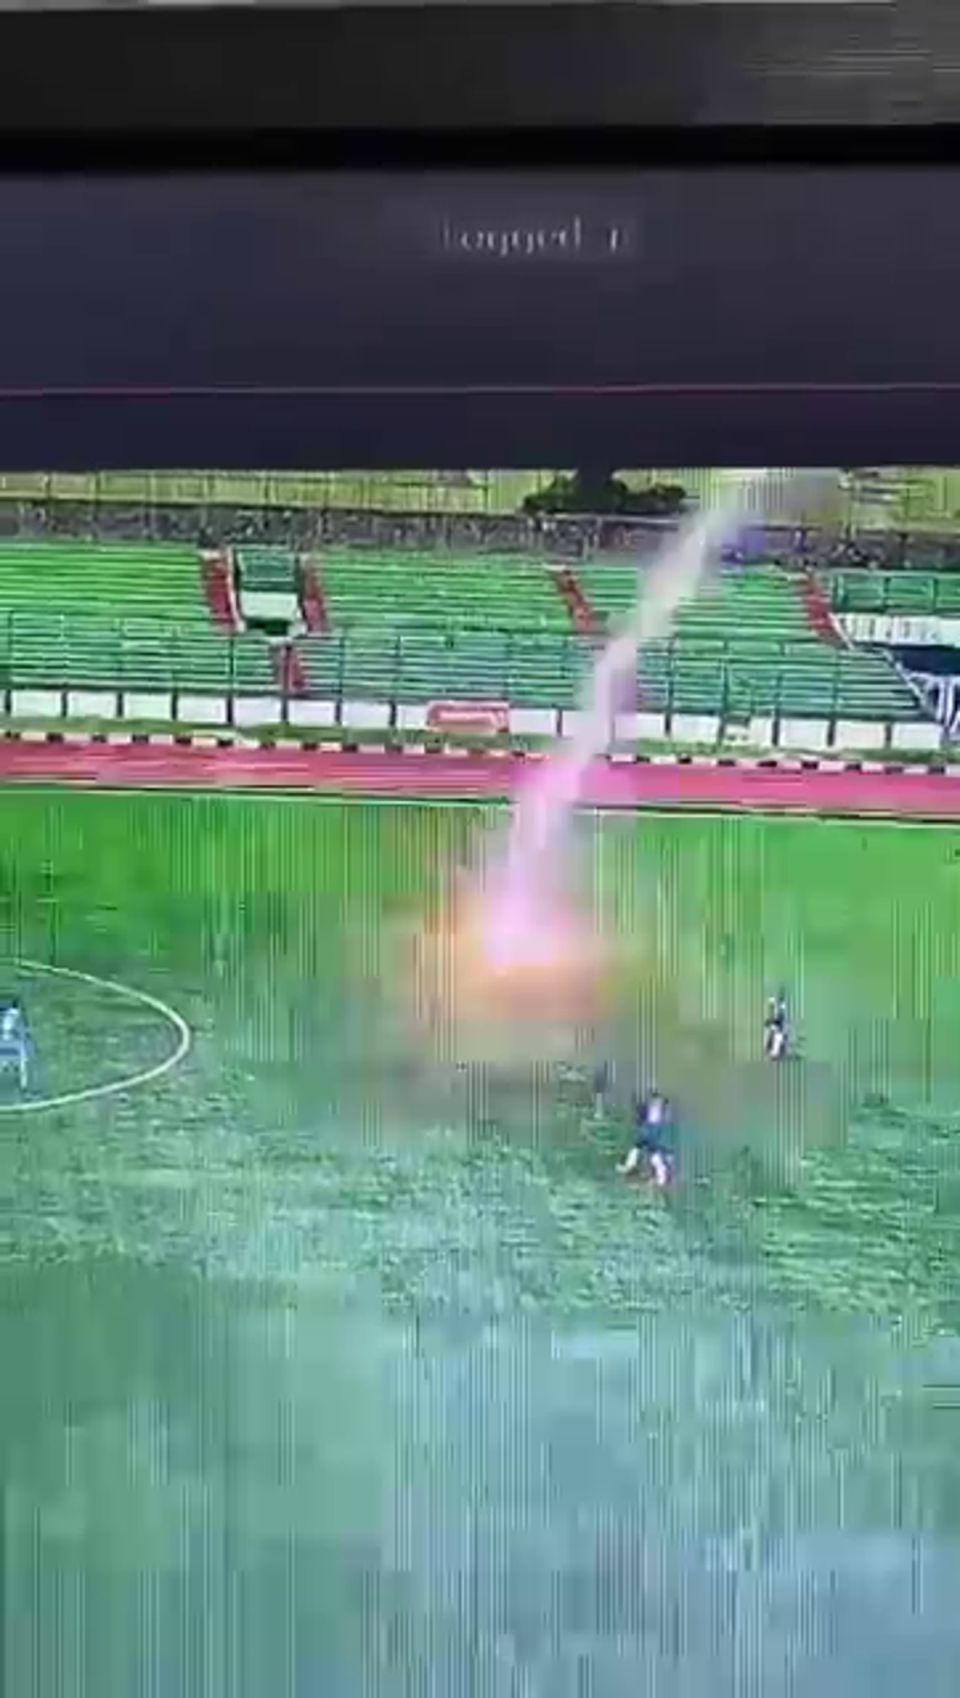 GRAPHIC WARNING - A video captured the moment a man was struck by lightning during a football match (Mojang Jajaka Youtube/YouTube)